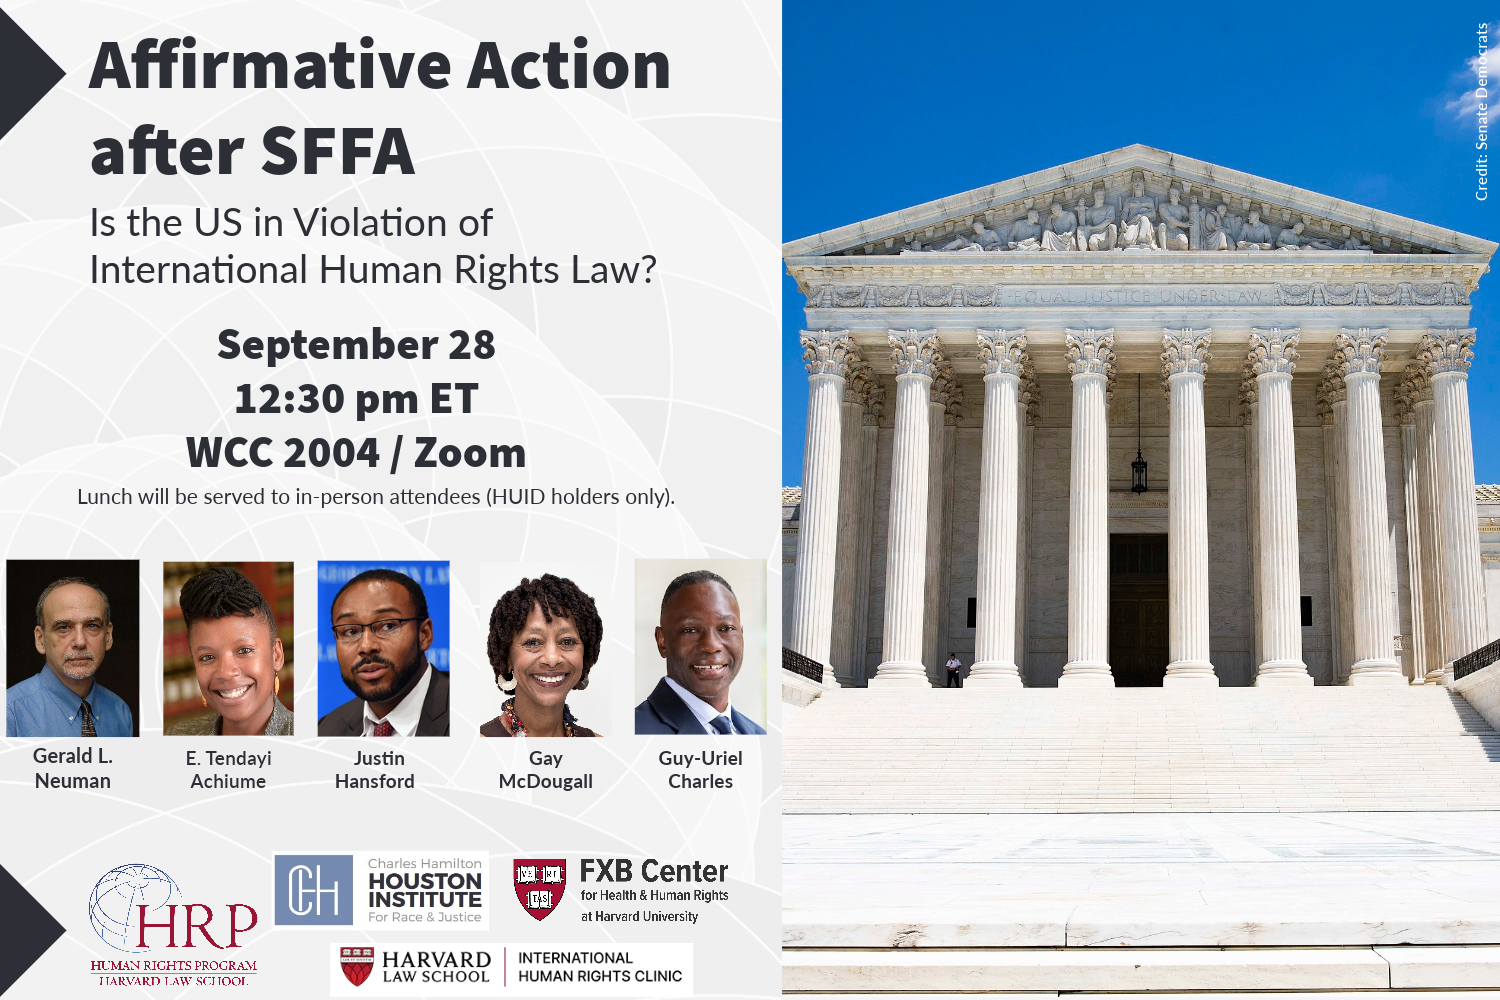 Event banner for "Affirmative Action after SFFA: Is the US in Violation of International Human Rights Law?" on September 28 at 12:30 pm ET. The venue is on Zoom or in-person in WCC 2004 (HUID holders only). The panelists are Gerald L. Neuman, E. Tendayi Achiume, Justin Hansford, Gay McDougall and Guy-Uriel Charles.